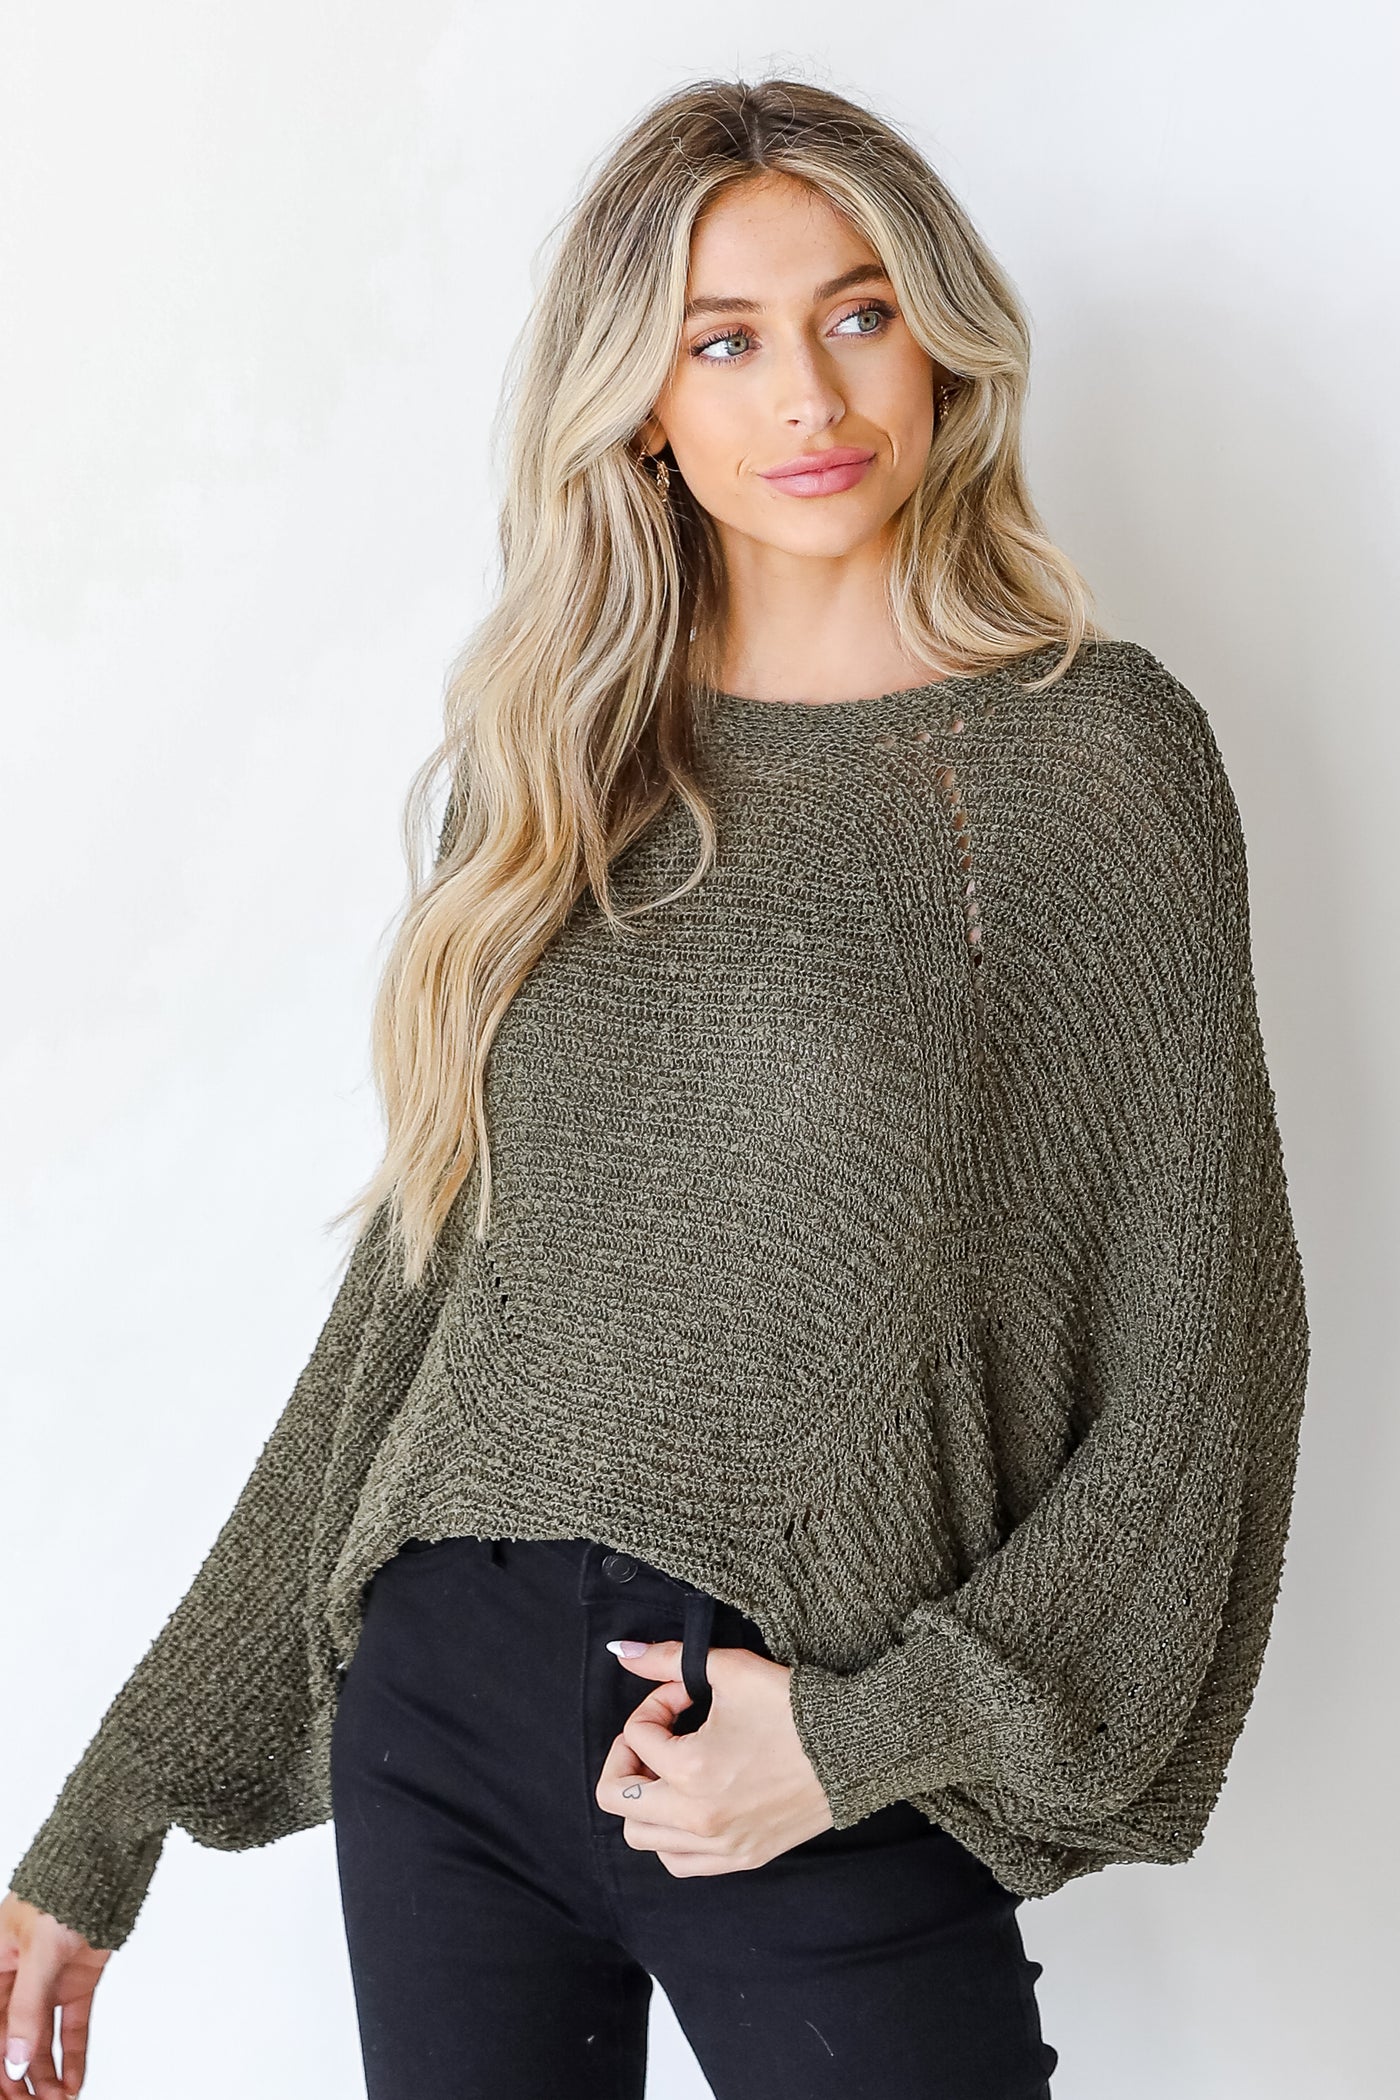 Sweater in olive